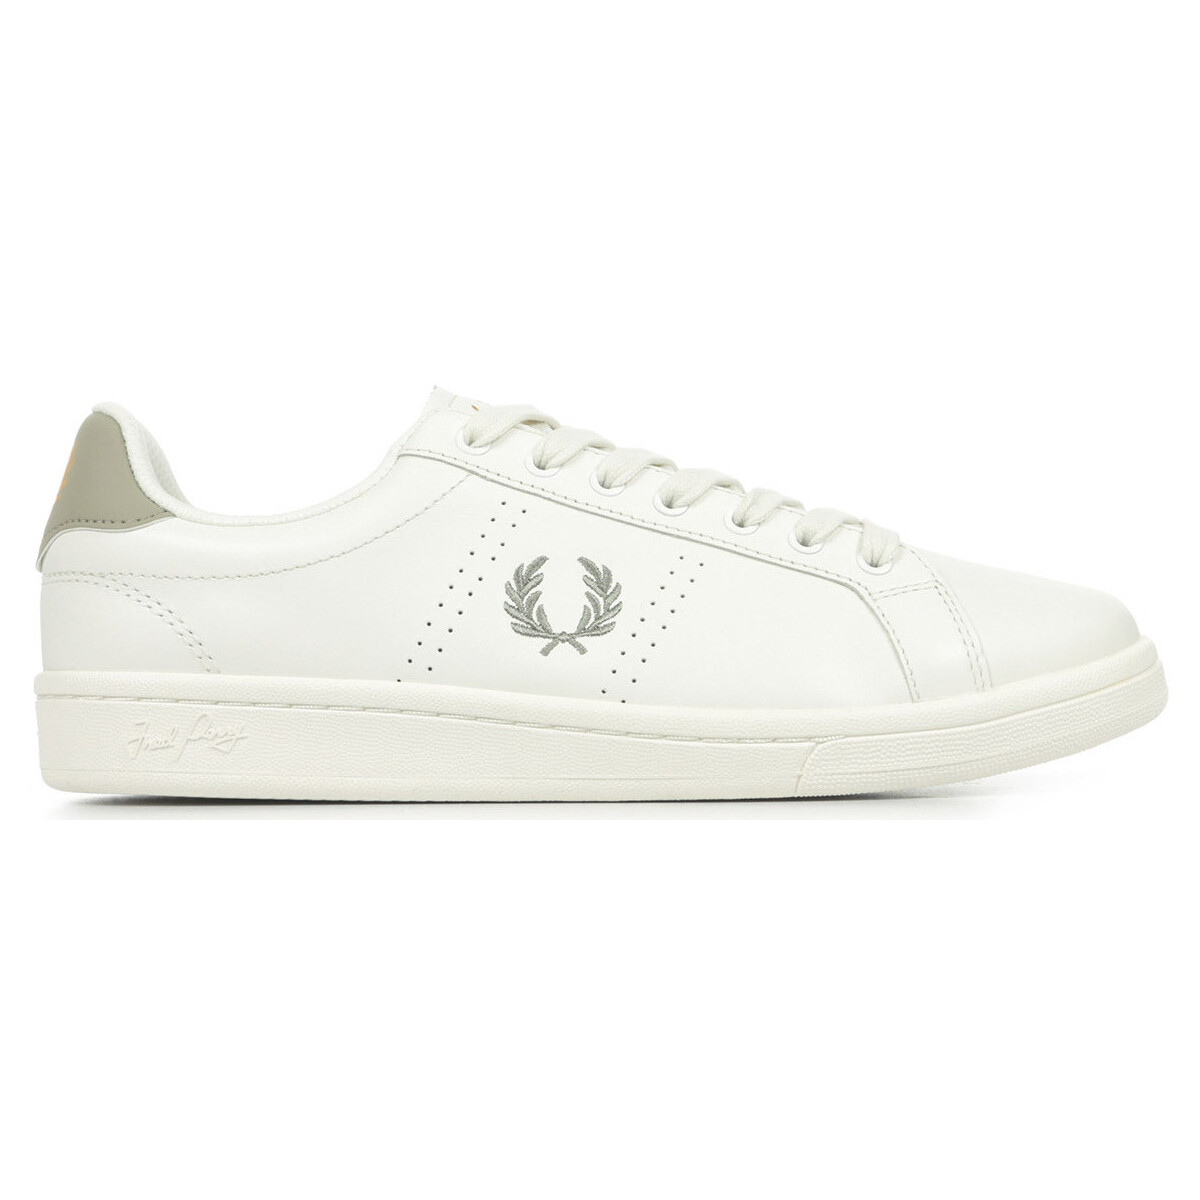 Chaussures Homme Baskets mode Fred Perry B721 Leather Blanc